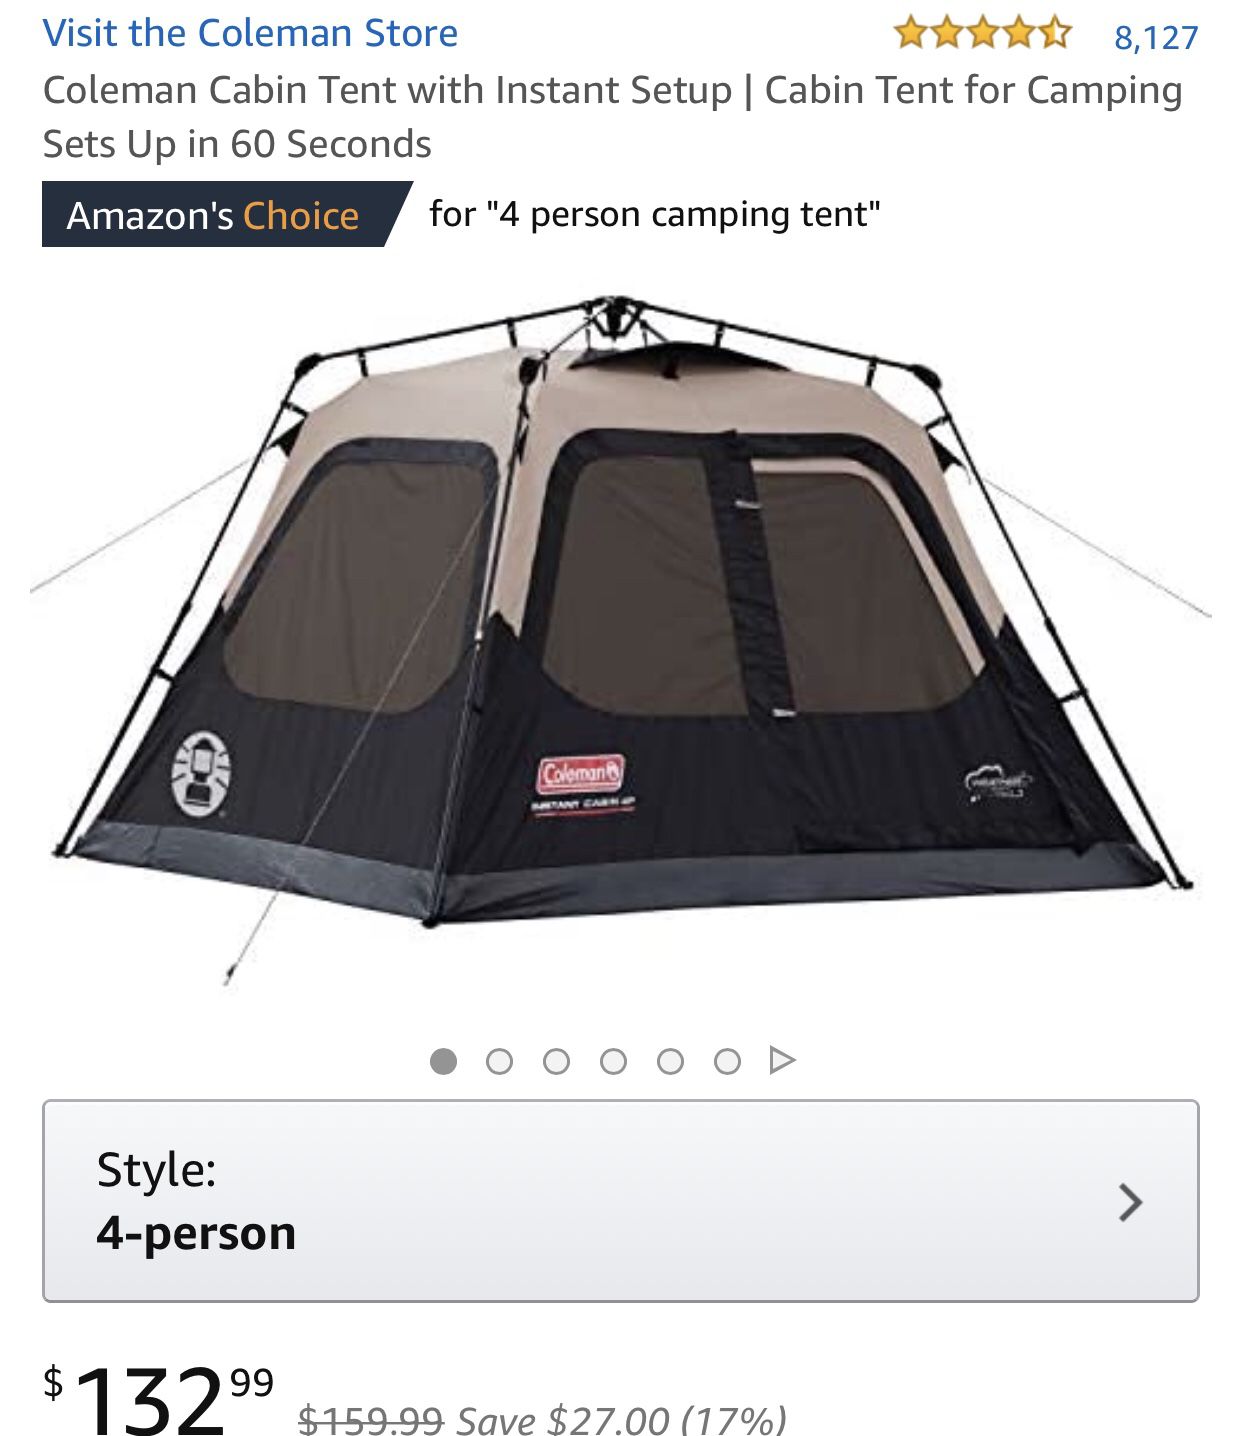 Coleman Cabin Tent with Instant Setup | Cabin Tent for Camping Sets Up in 60 Seconds